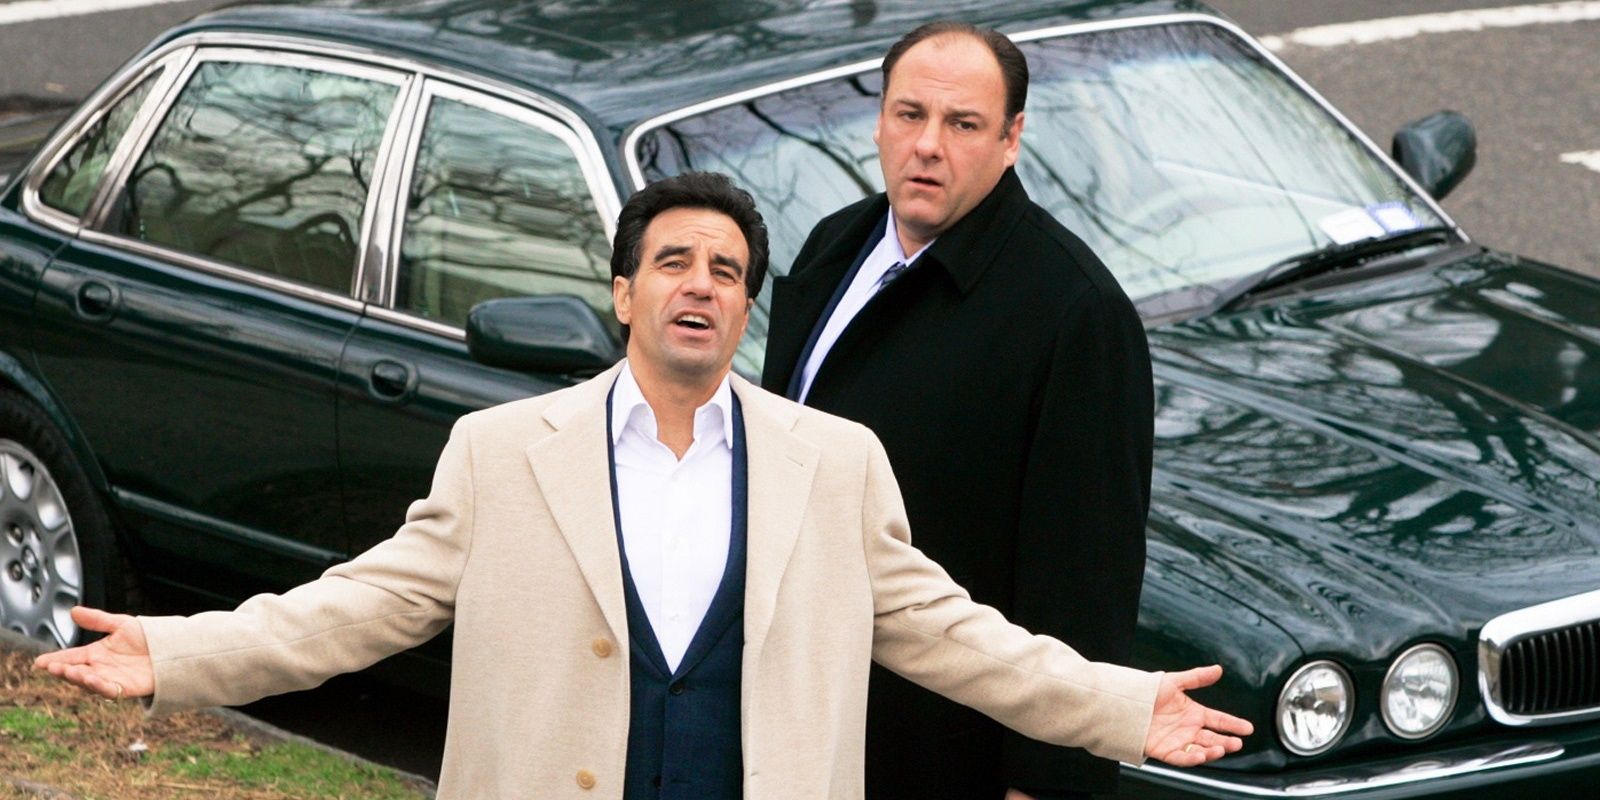 The Sopranos The 10 Best Characters Introduced After Season 1